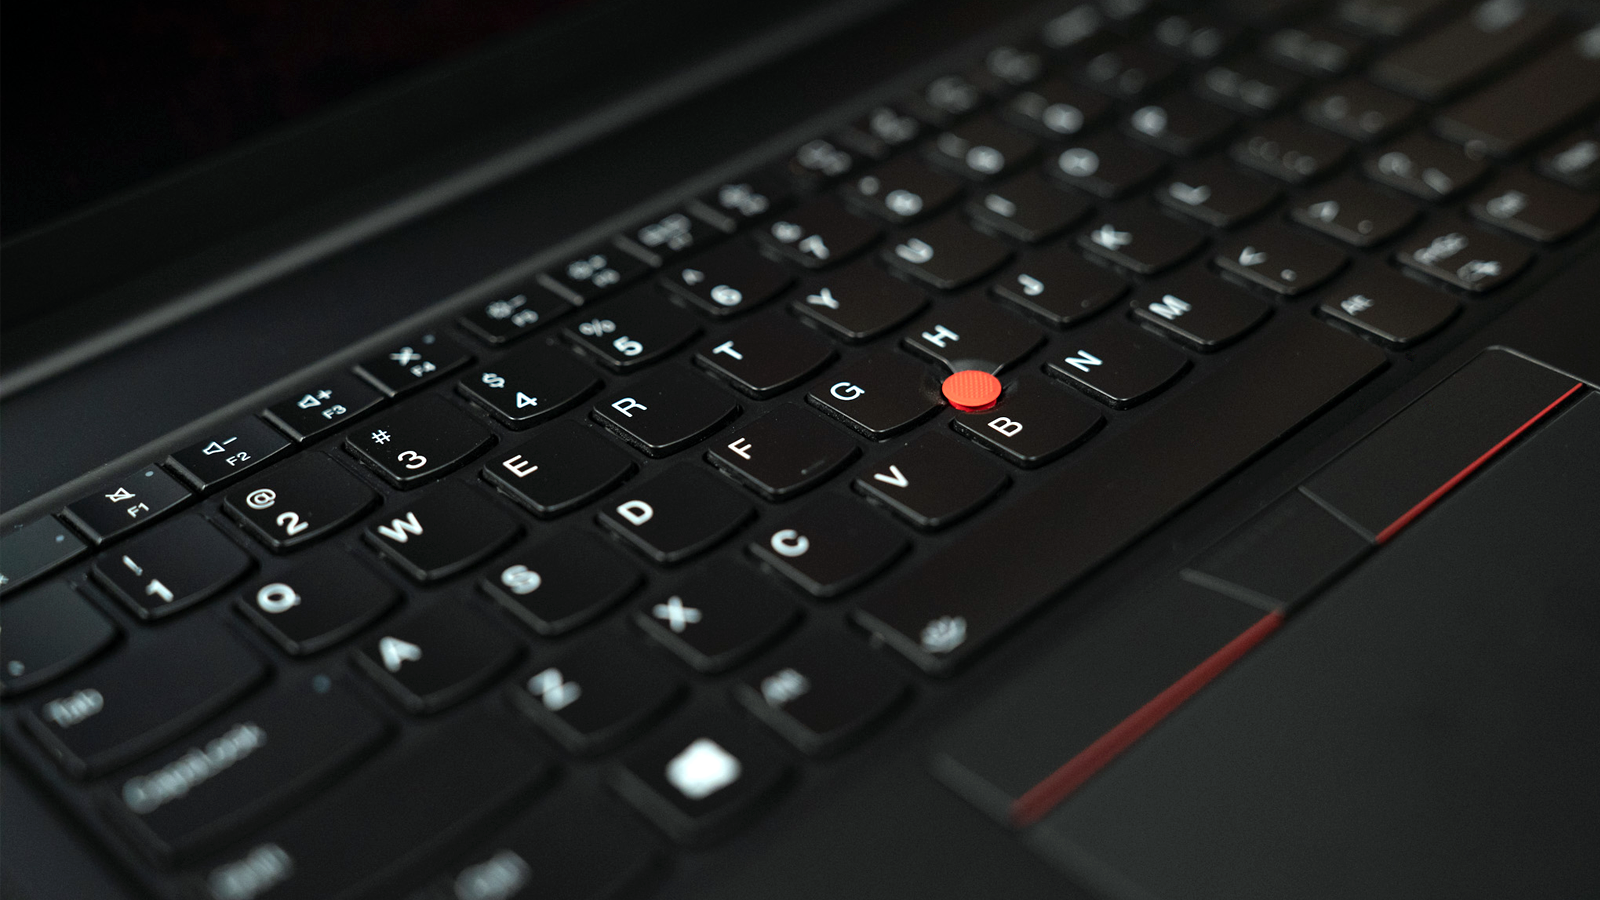 Close-up on the Lenovo Gen 4 laptop's keyboard and TrackPoint nub